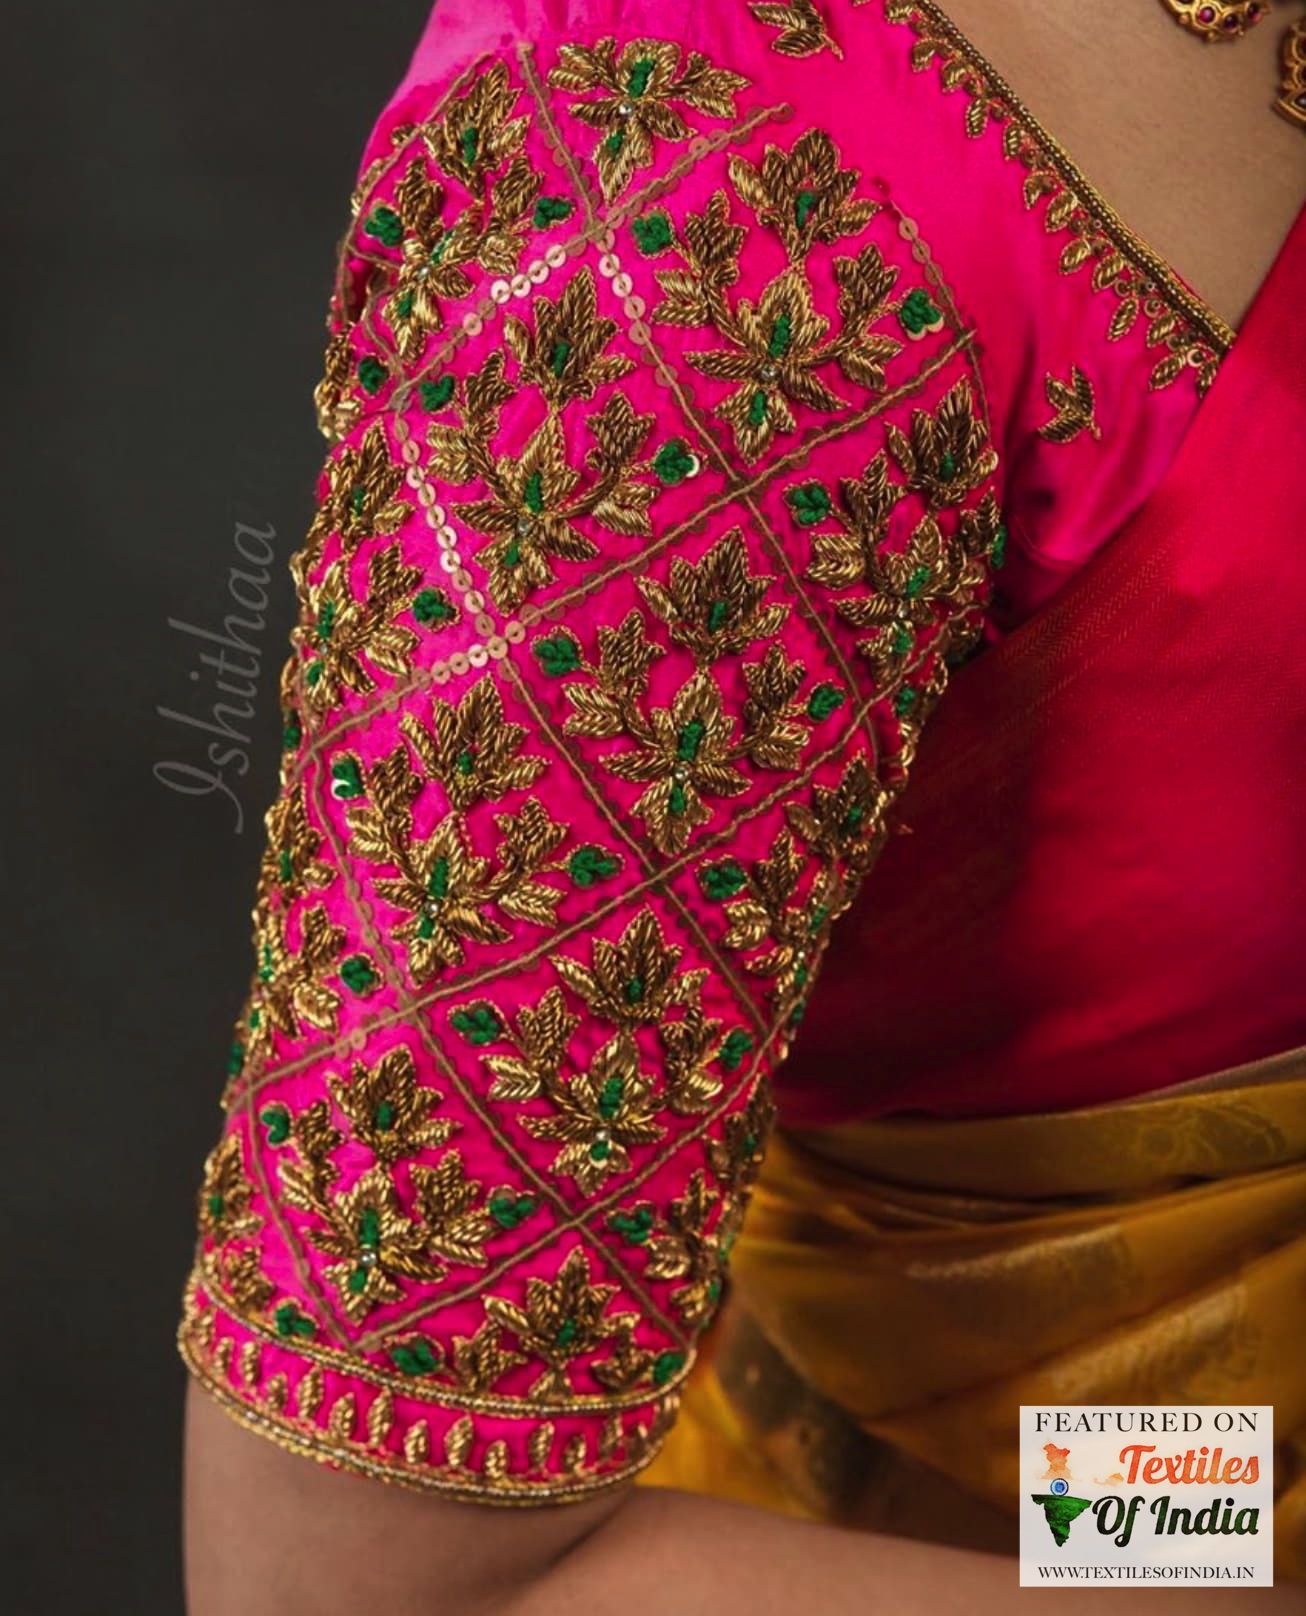 Bejewelled Stunning South Indian ideas Wedding silk saree blouse front / back design inspiration